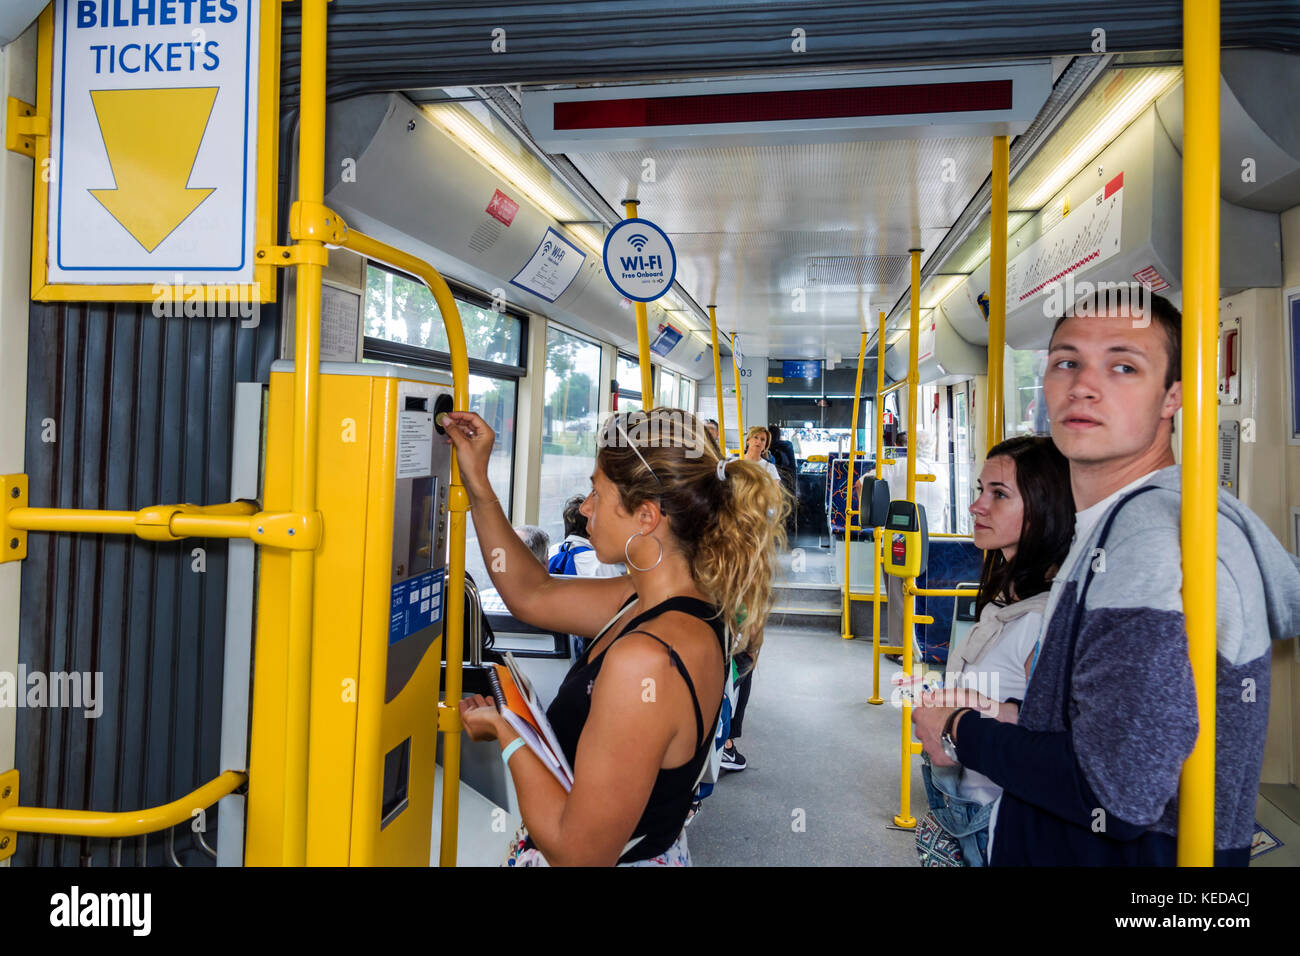 Lisbon Portugal,Carris,Tram 15,Belem Highway Route,onboard ticket vending machine,man men male,woman female women,transaction paying pays buying buys, Stock Photo